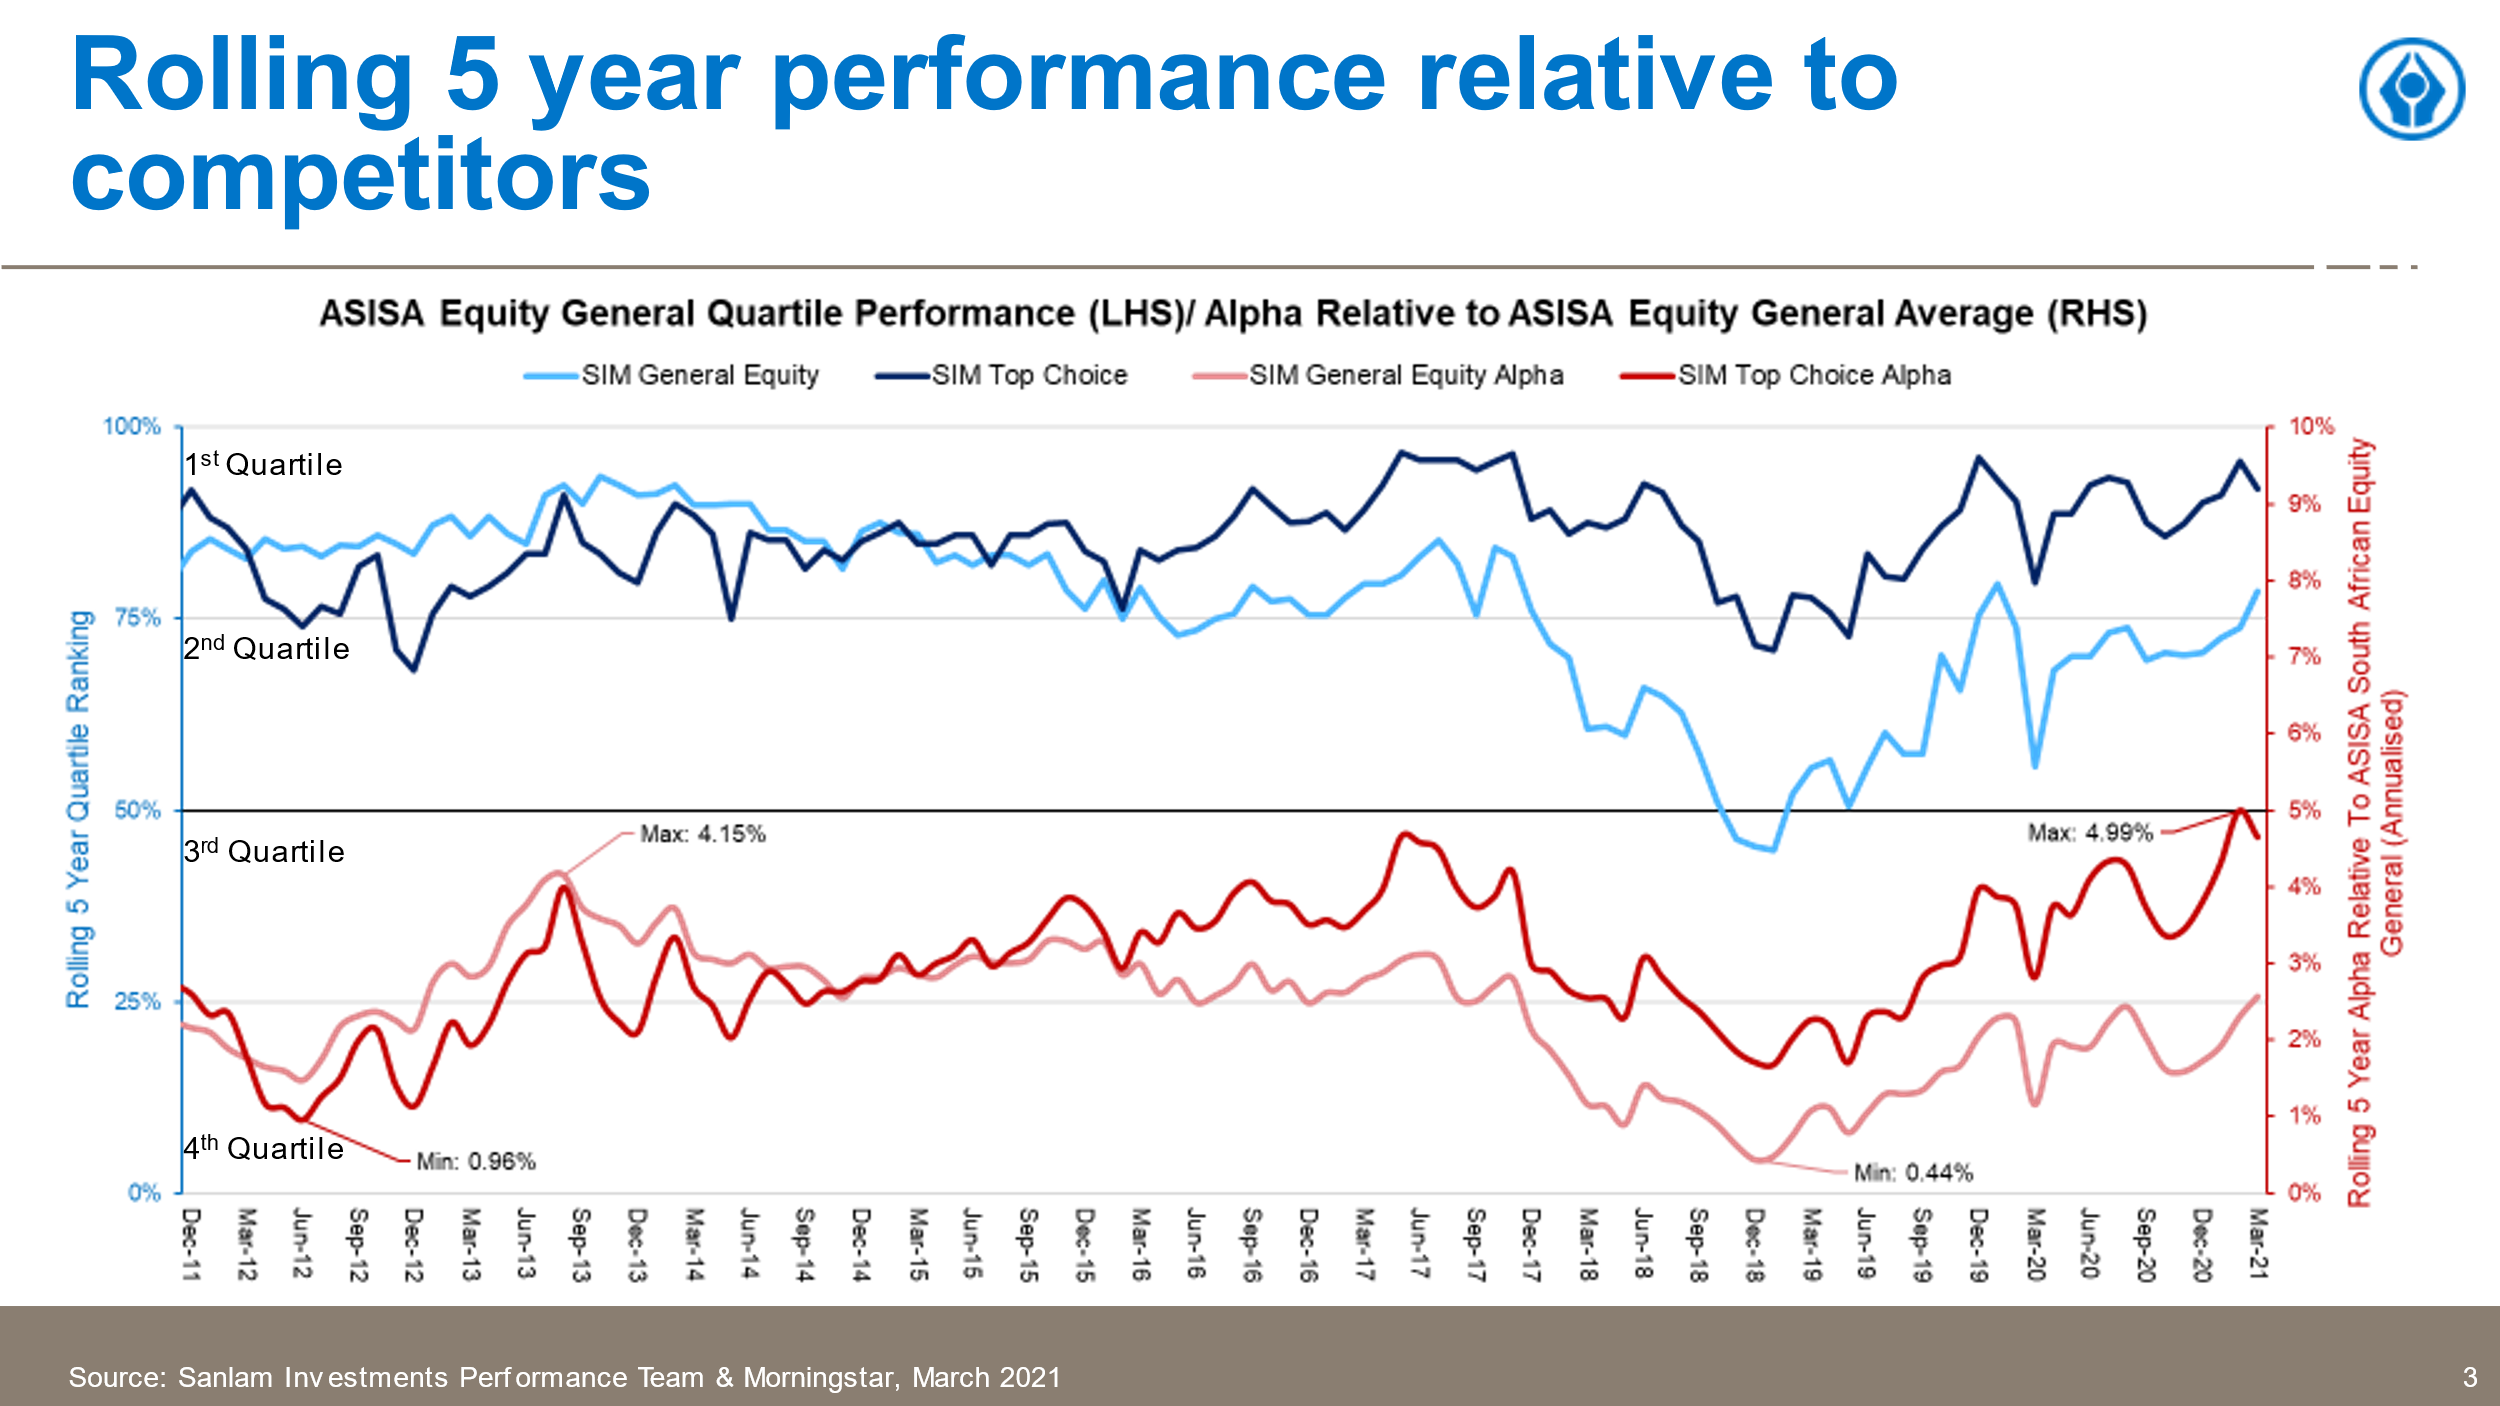 Rolling 5 year performance relative to competitors